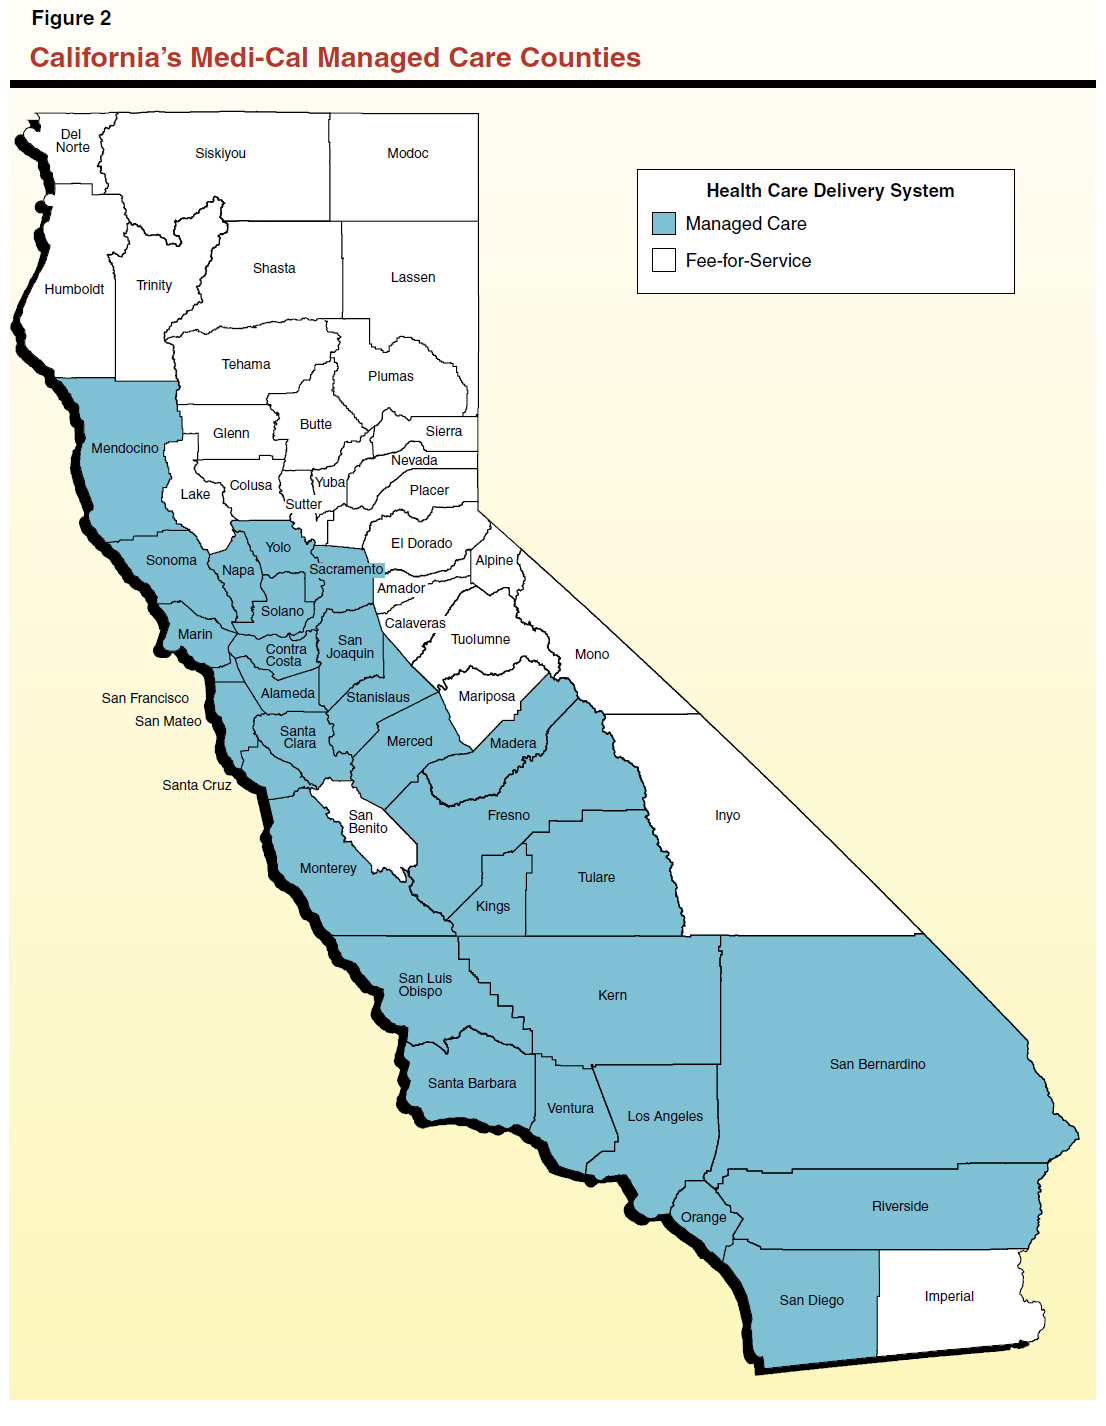 Figure 2 - Map of California's Medi-Cal Managed Care Counties